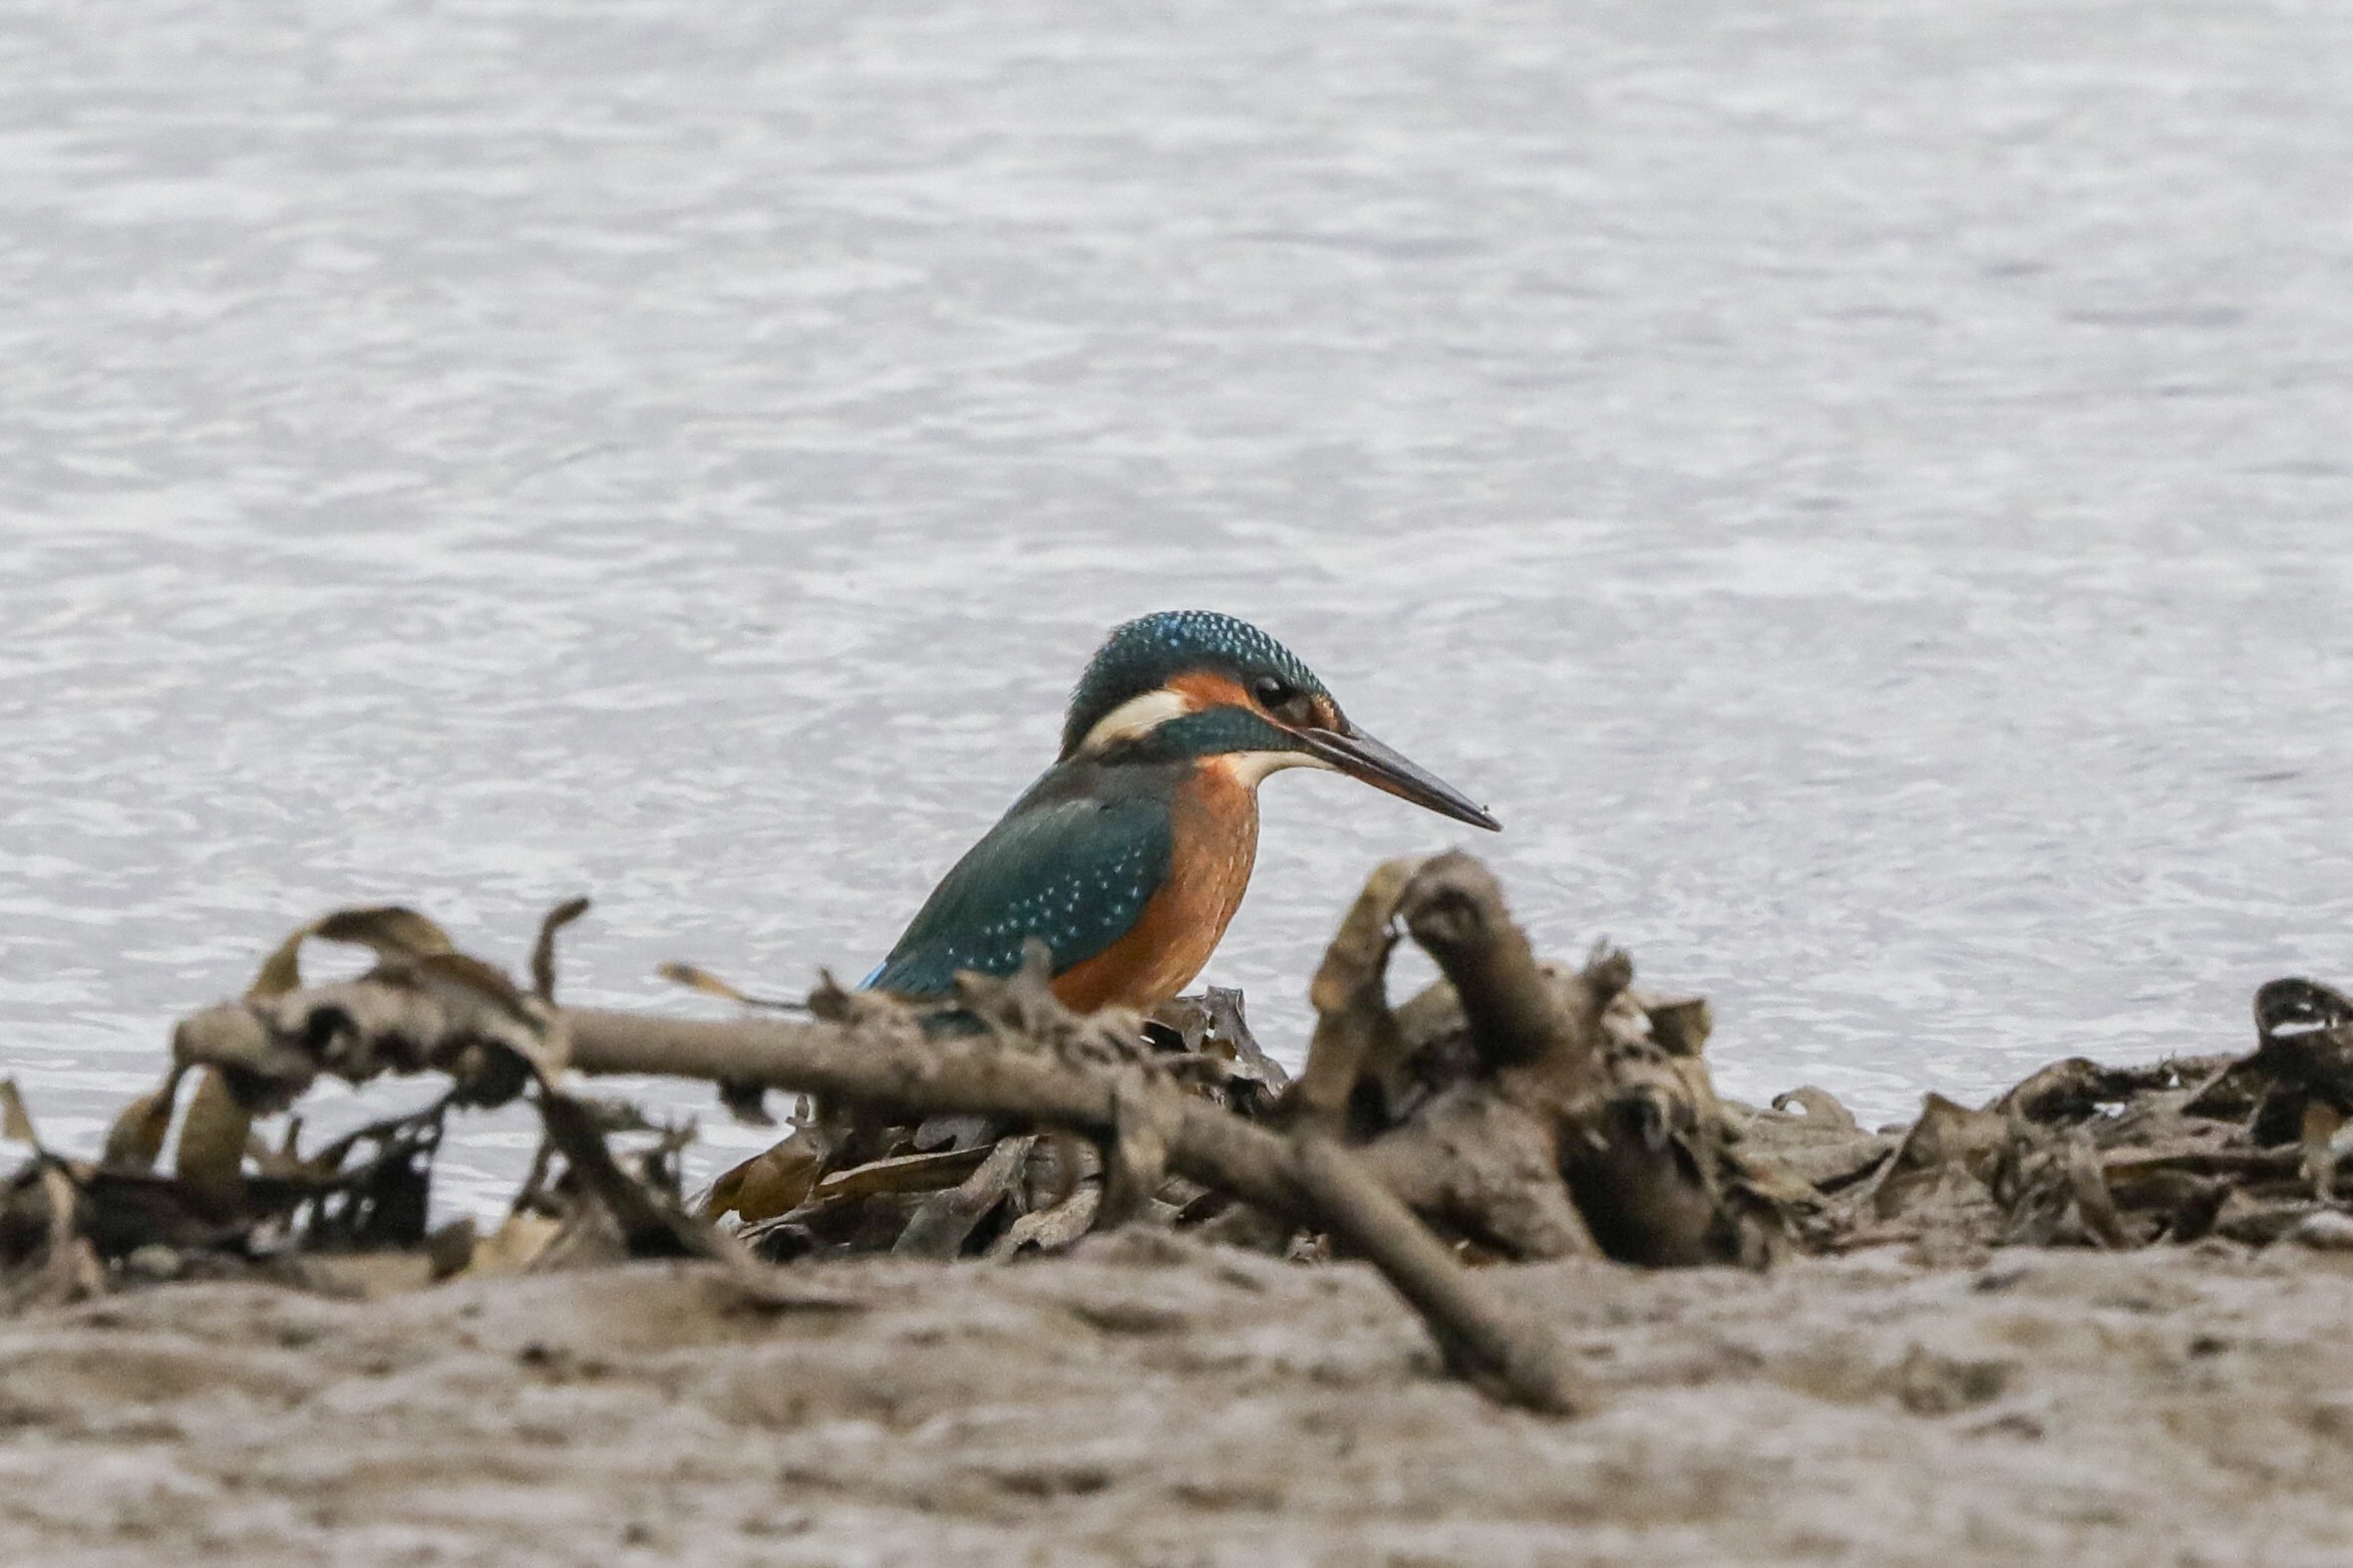 What Is A Kingfisher’s Diet? – a kingfisher pellet analysis